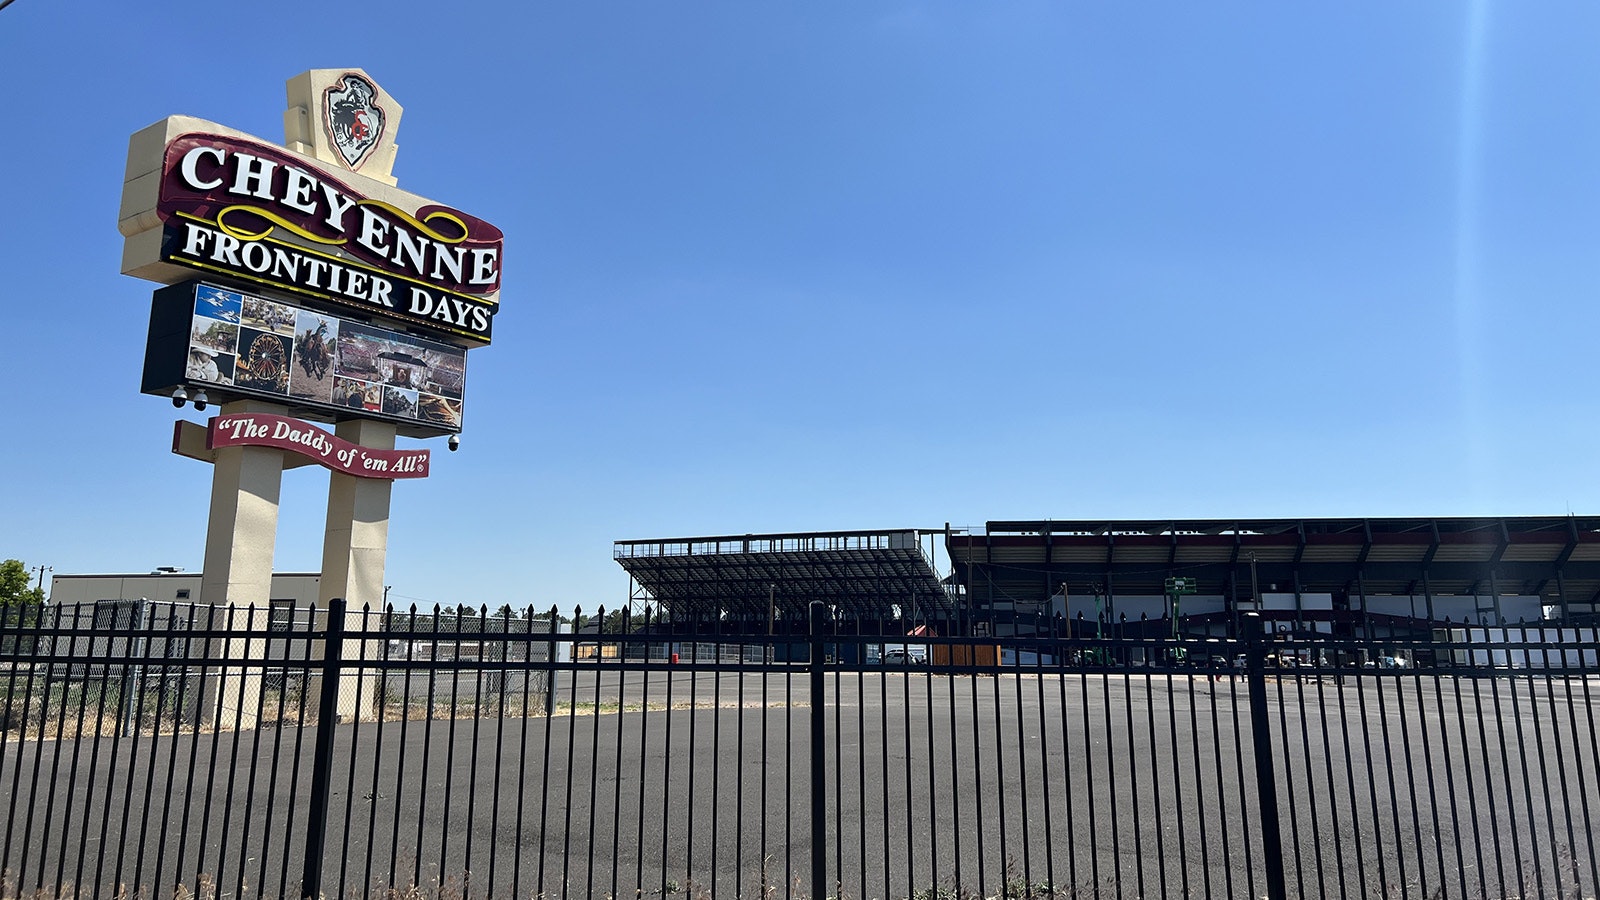 A Colorado man claims in a lawsuit that a Cheyenne Frontier Days bouncer roughed him up and seriously hurt him during a concert in 2022.